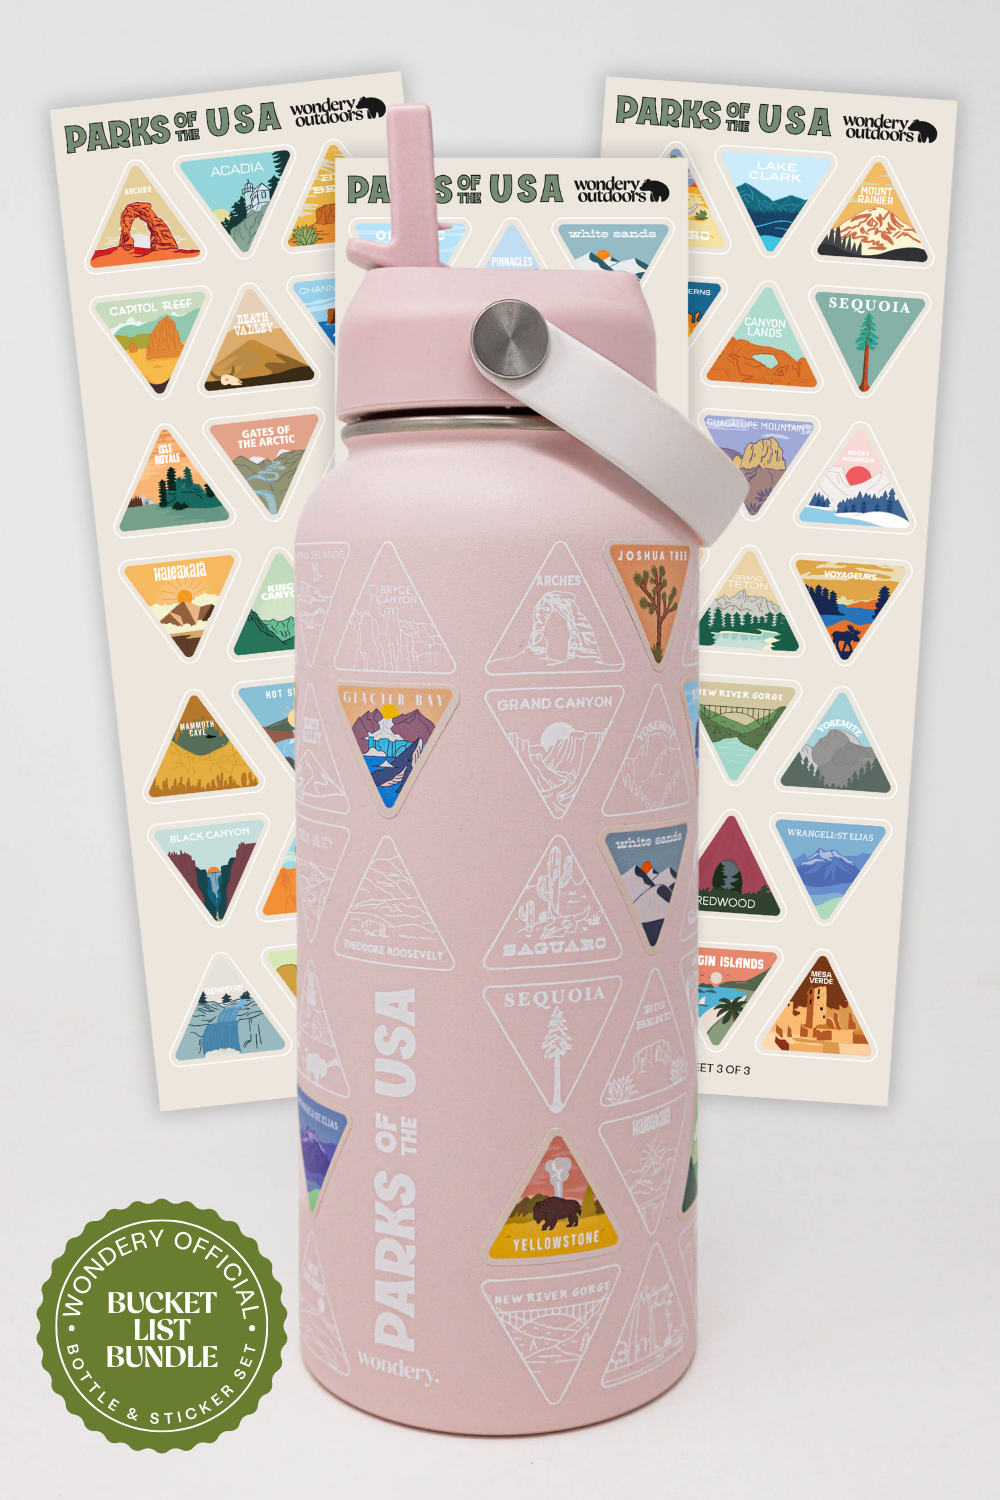 #color_dusty pink _pink travel camping hiking water bottle with carrying strap